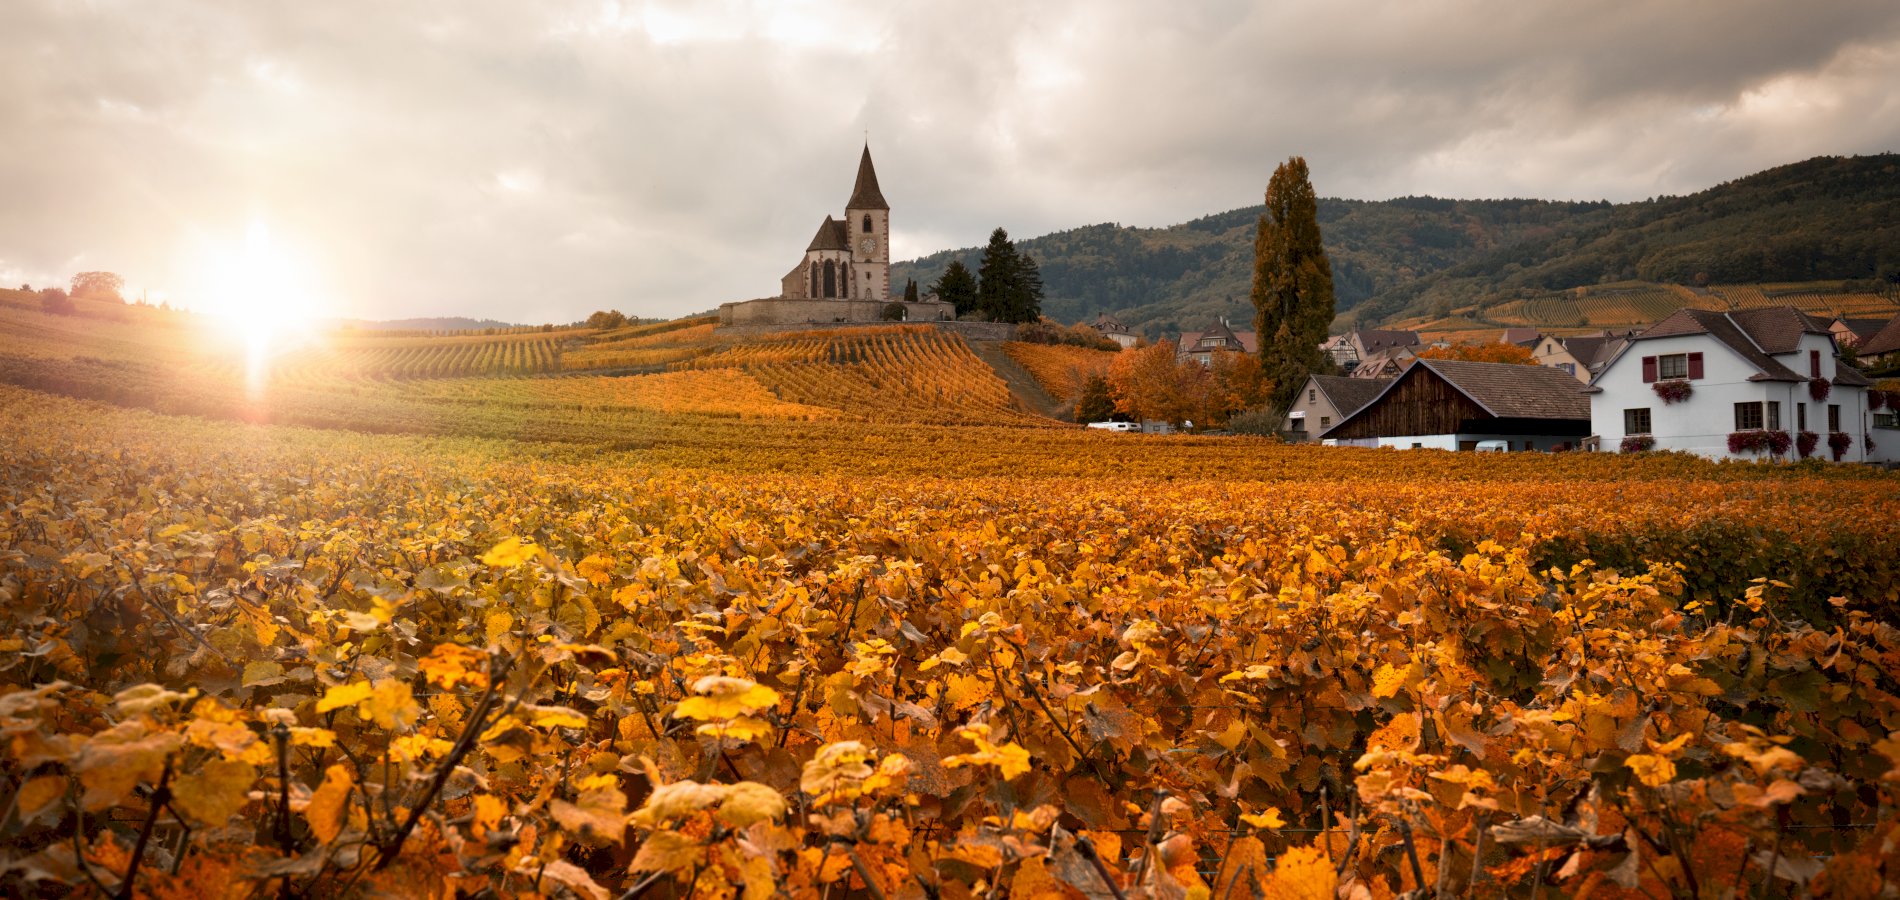 Ophorus Tours - Alsace Wine Tour from Strasbourg Half Day